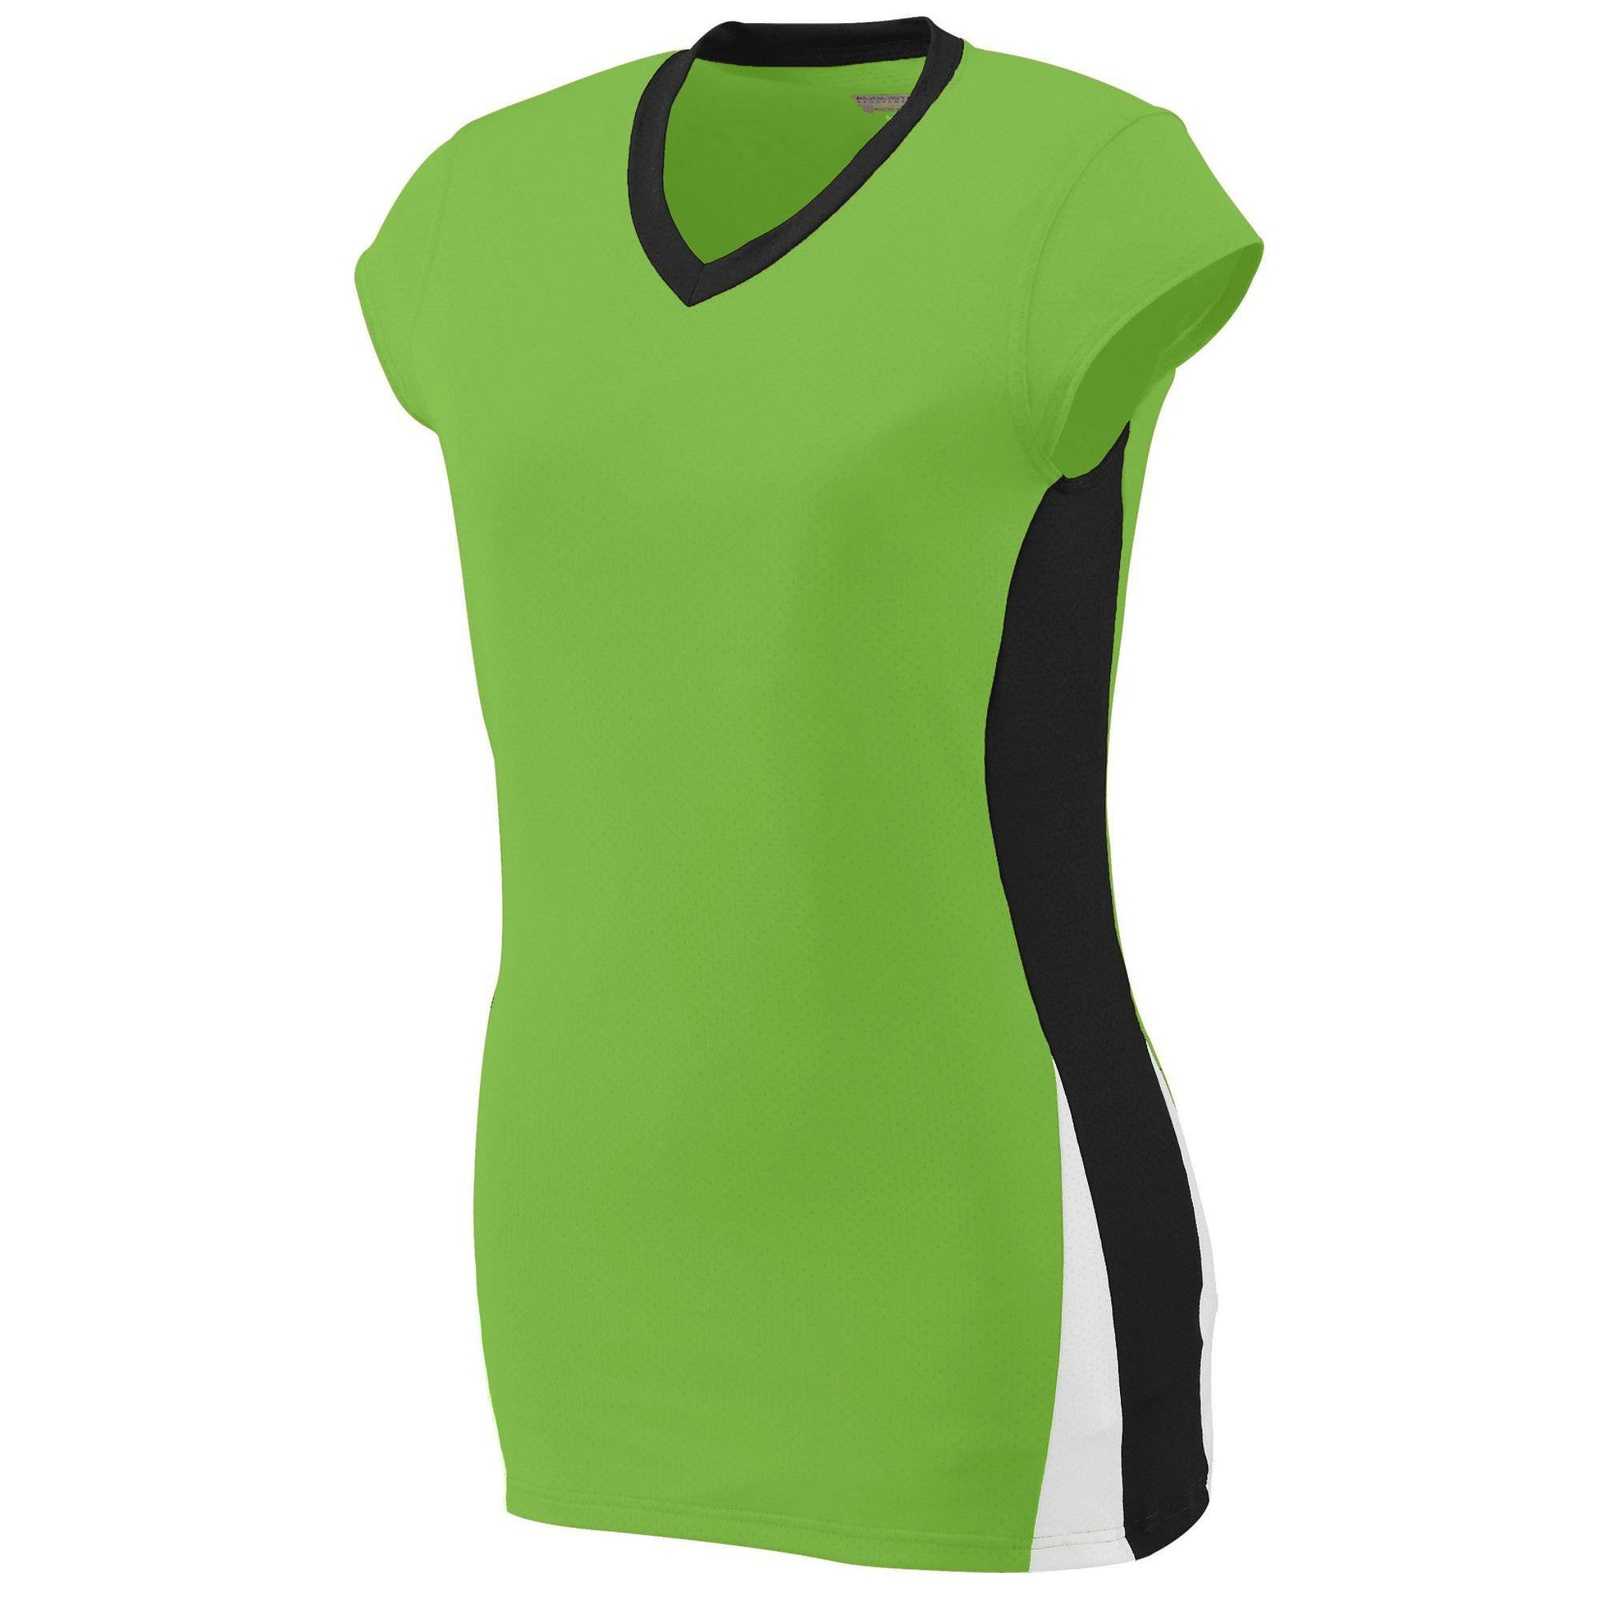 Augusta 1311 Girls Hit Jersey - Lime Black White - HIT a Double